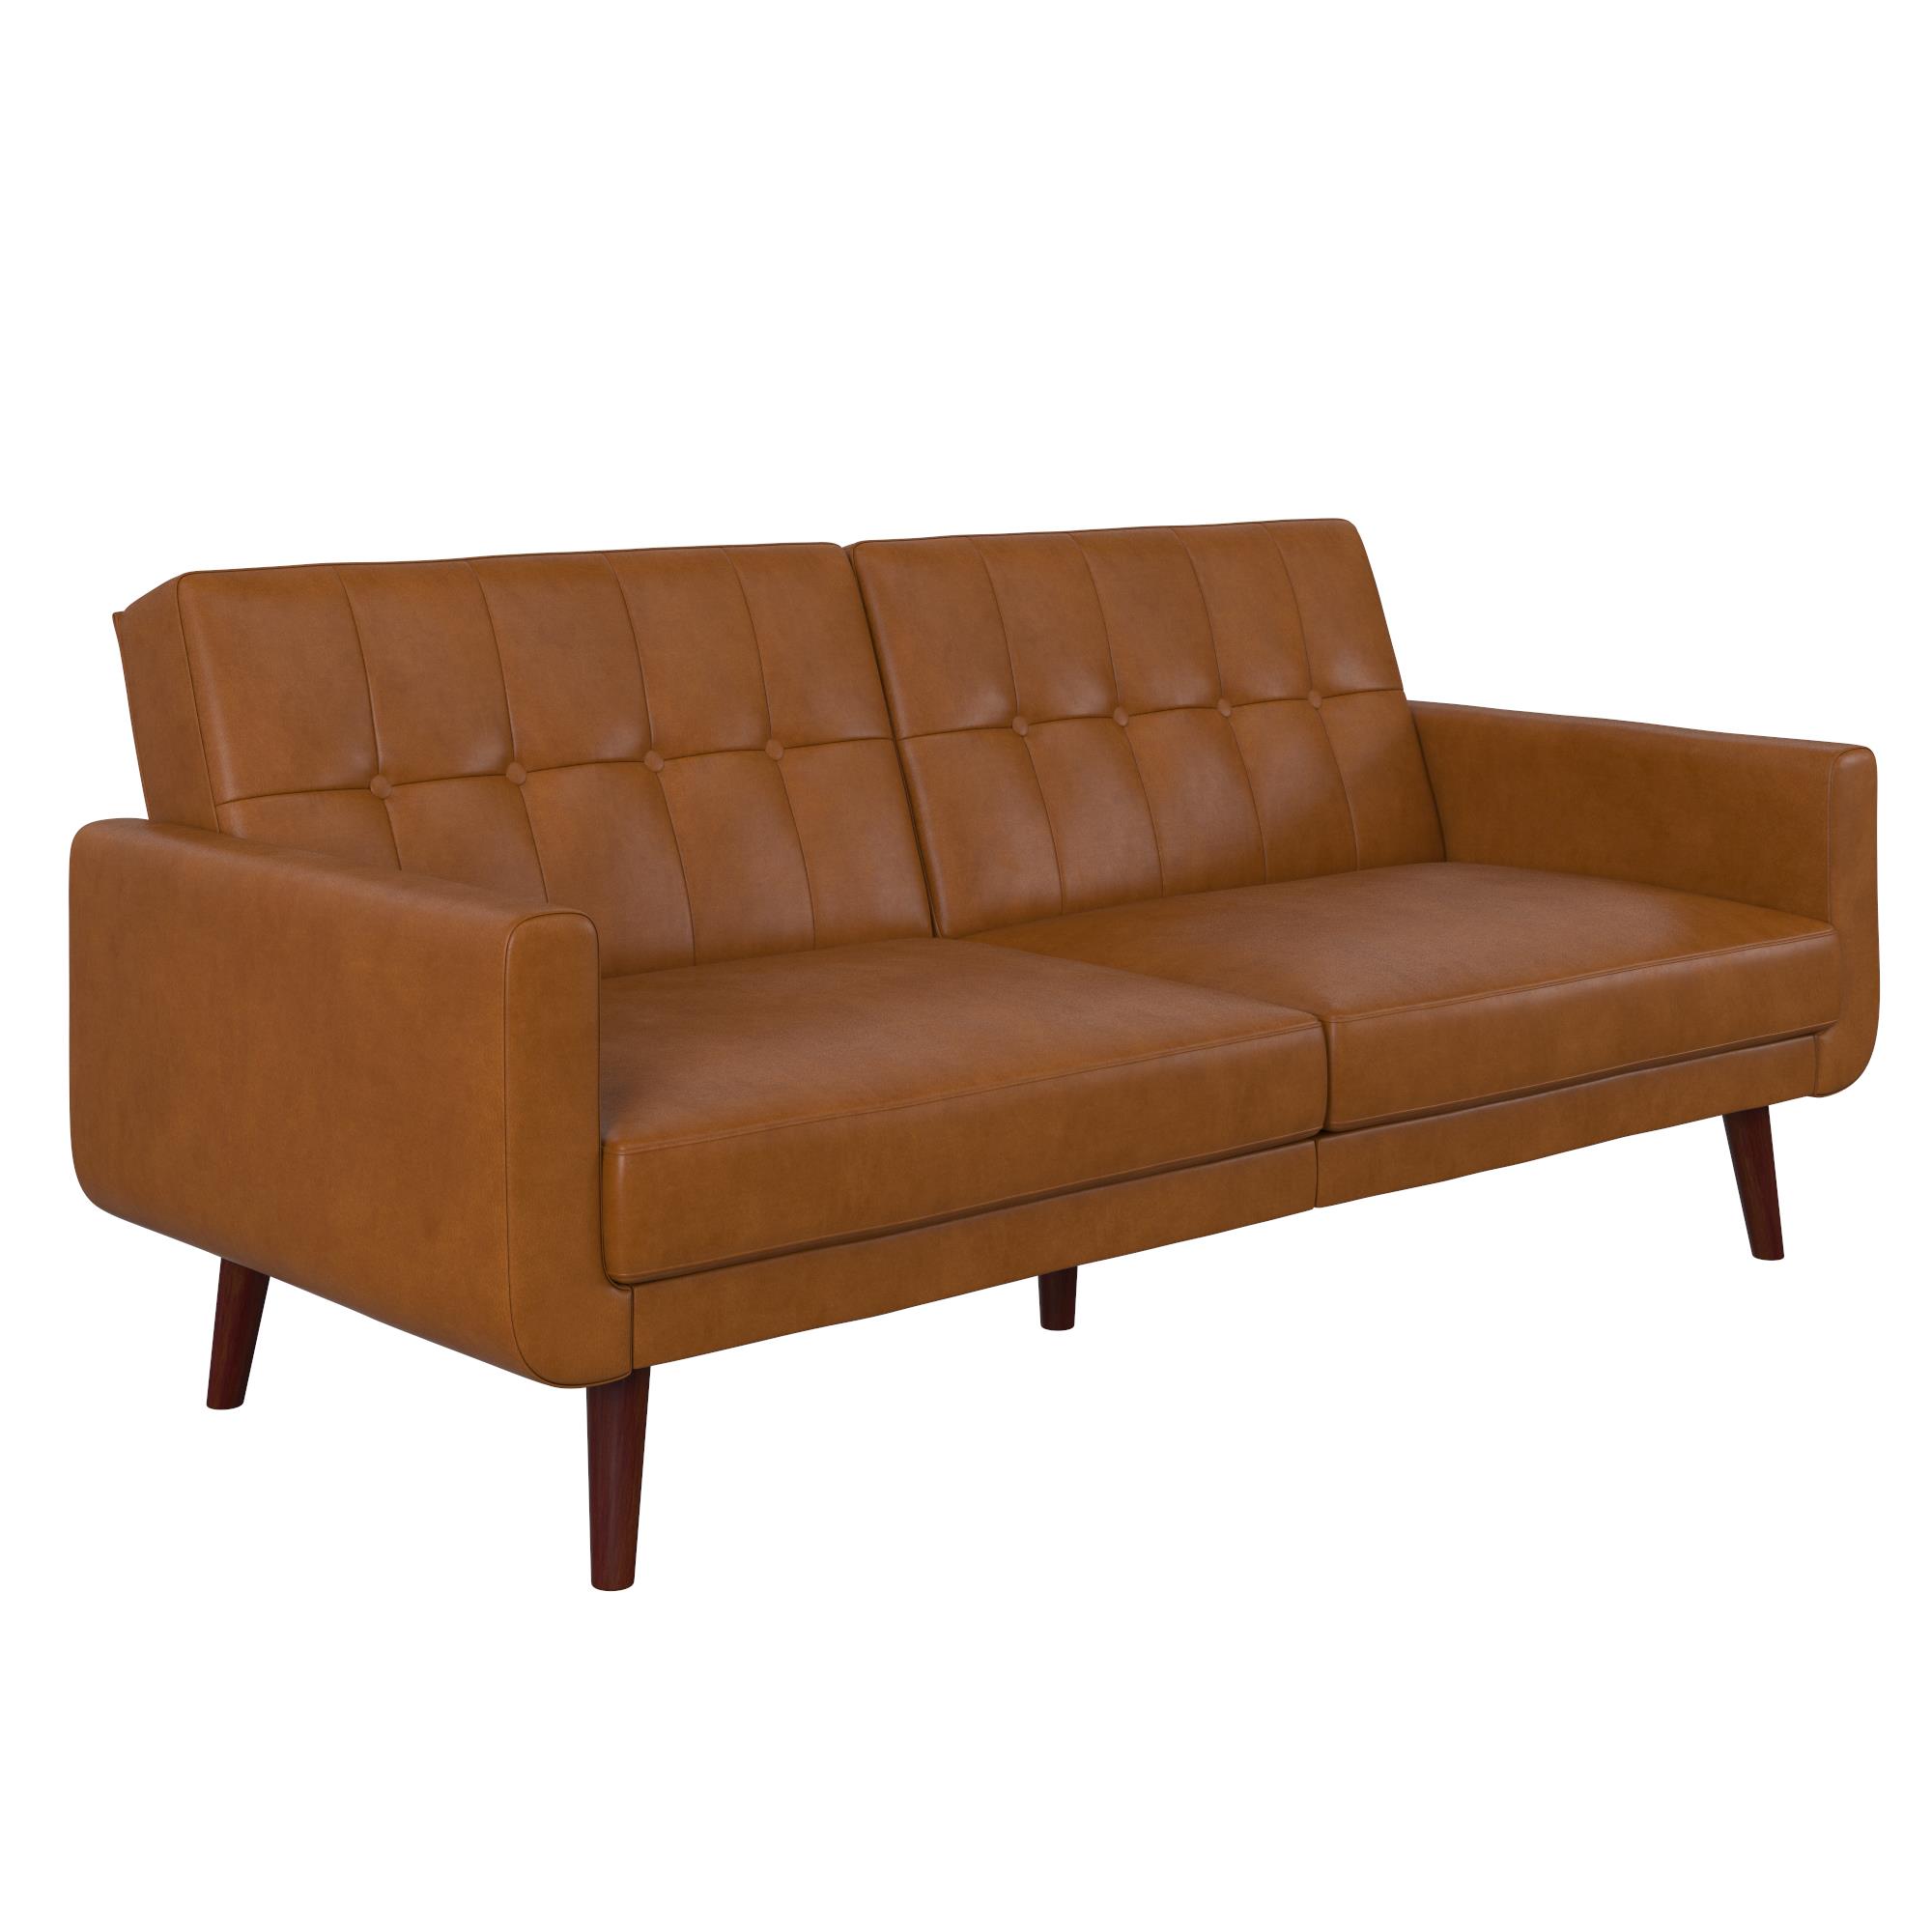 Better Homes & Gardens Nola Modern Futon, Camel Faux Leather - image 5 of 17